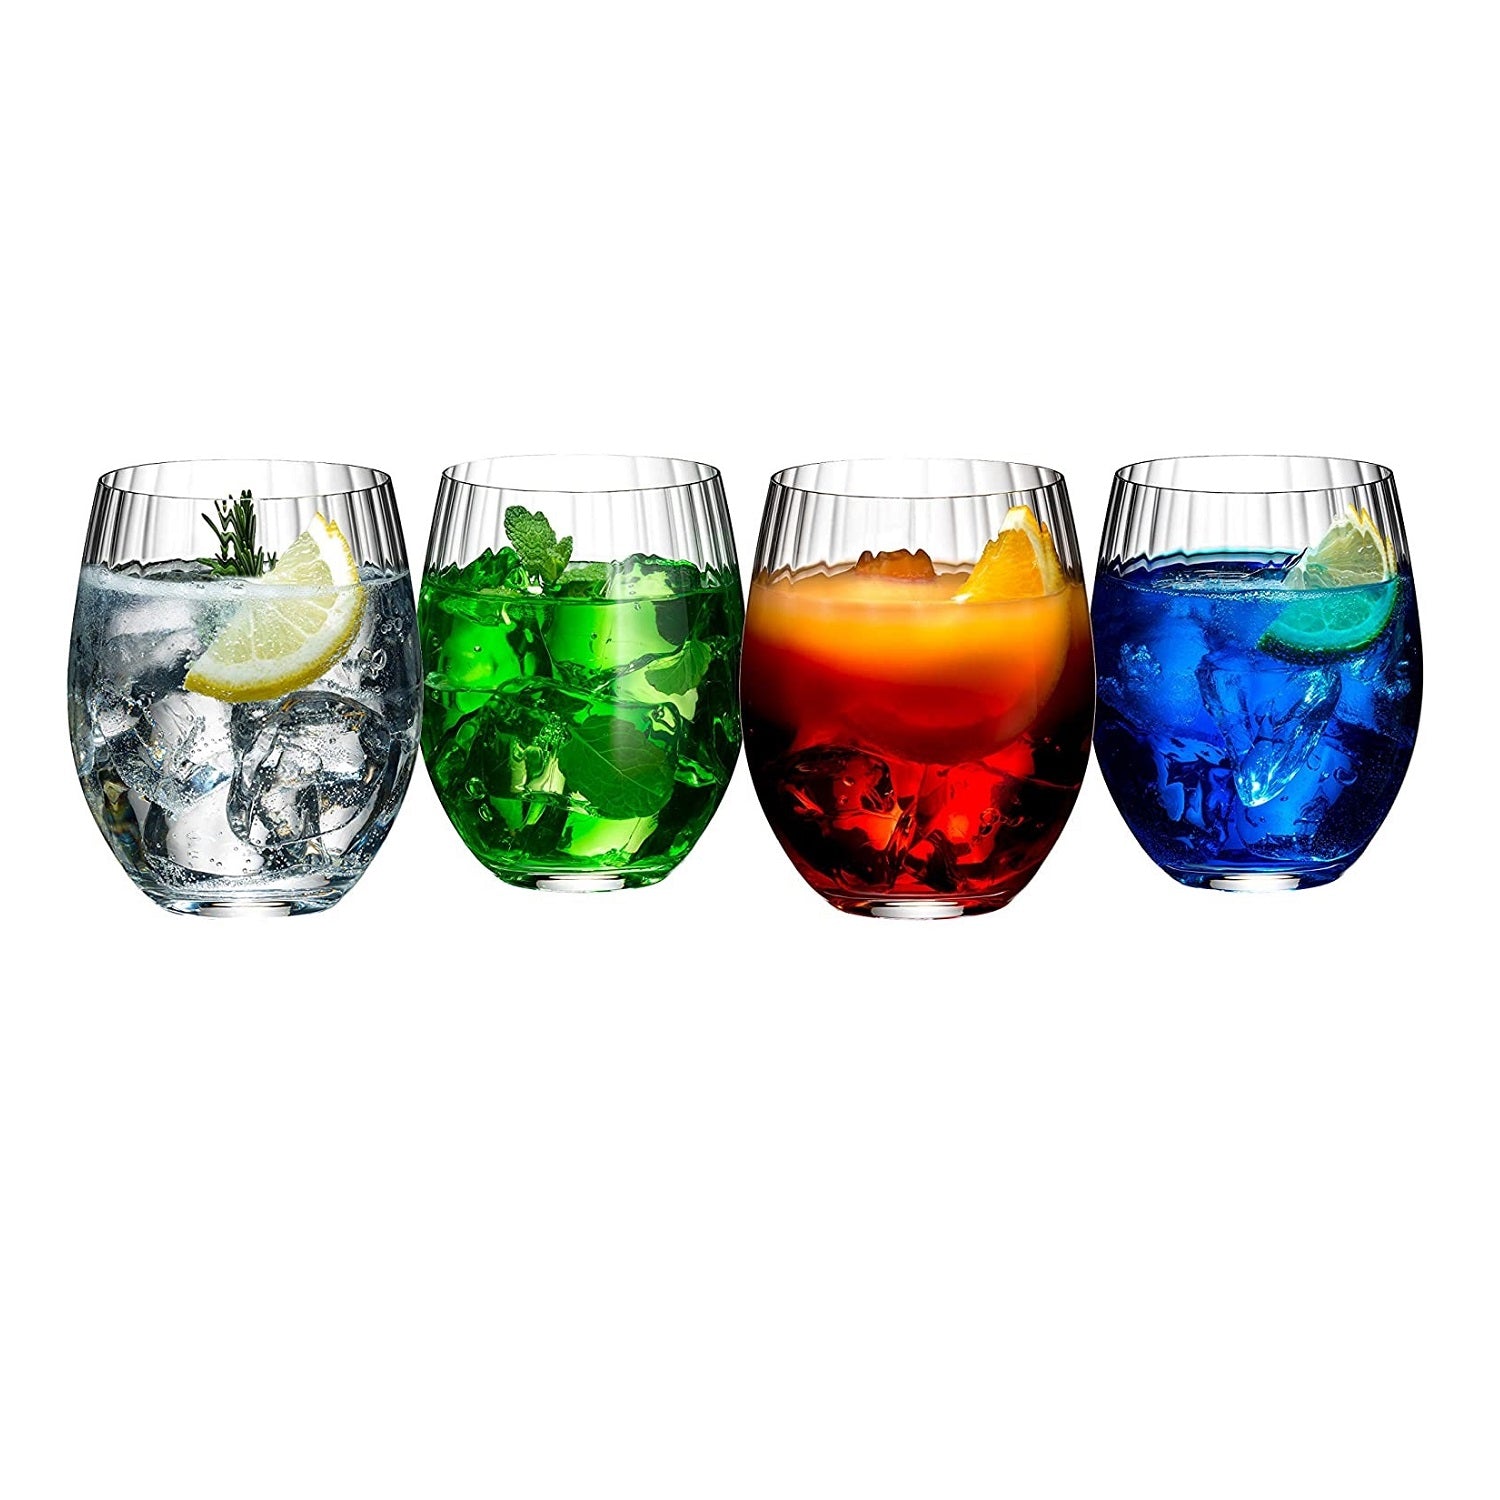 Riedel Mixing Tonic Set, Set of 4 Cocktail Glasses